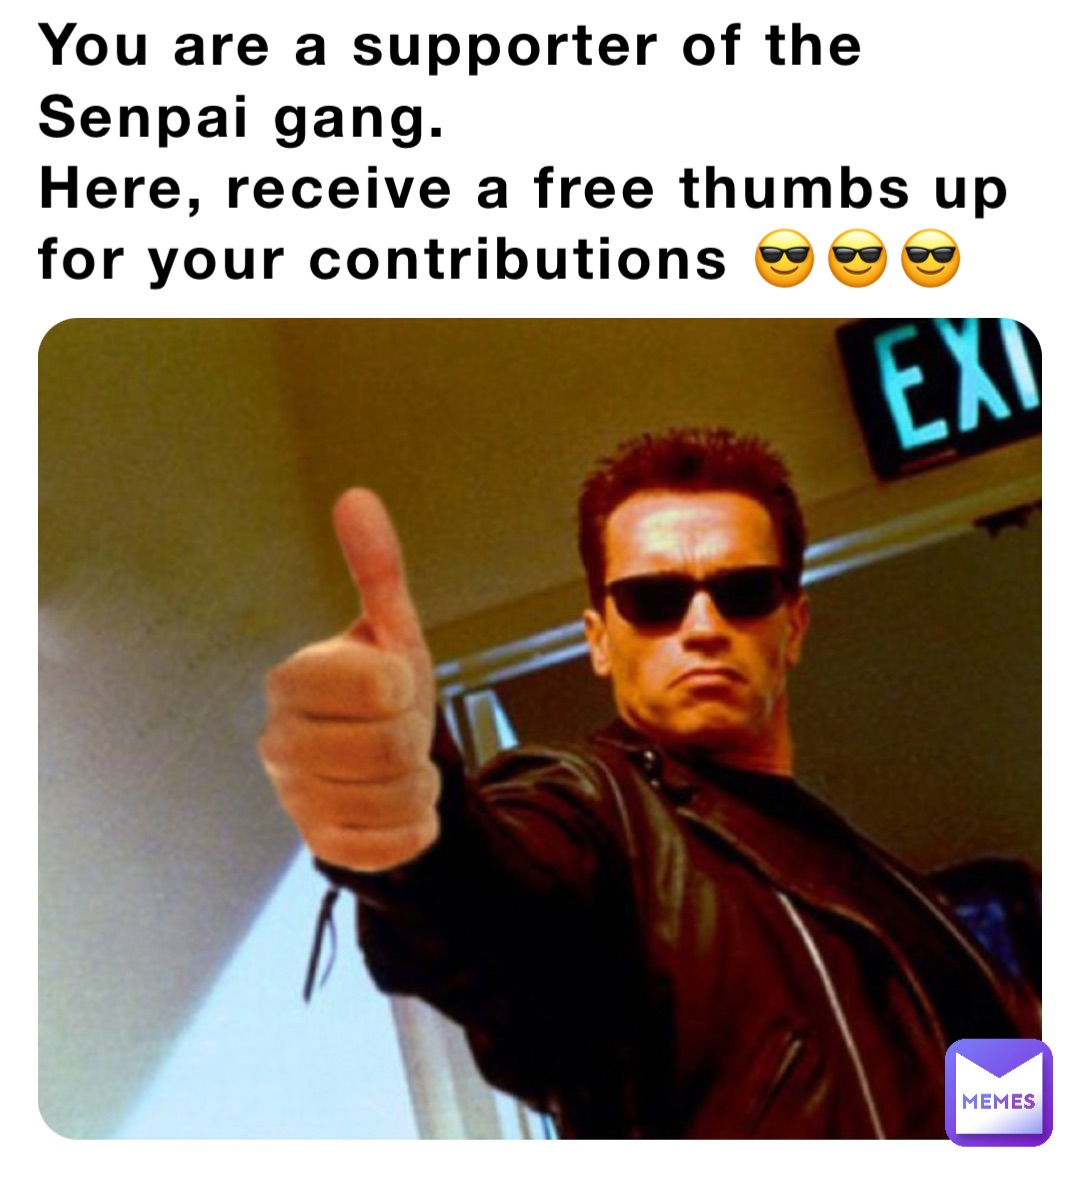 You are a supporter of the Senpai gang.
Here, receive a free thumbs up for your contributions 😎😎😎